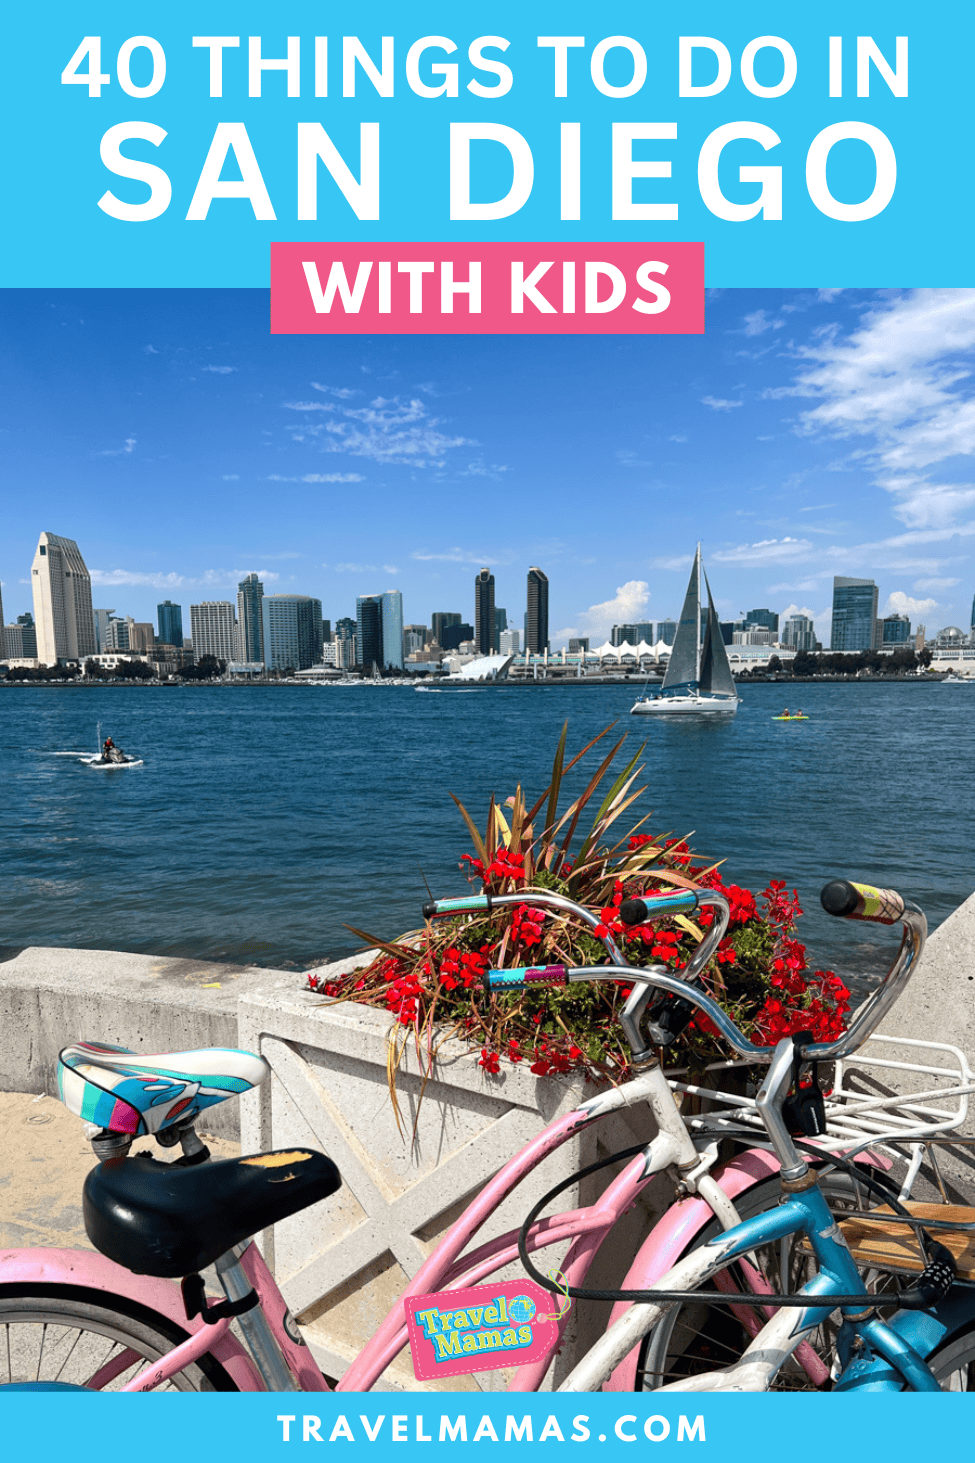 Top Things to Do in San Diego with Kids